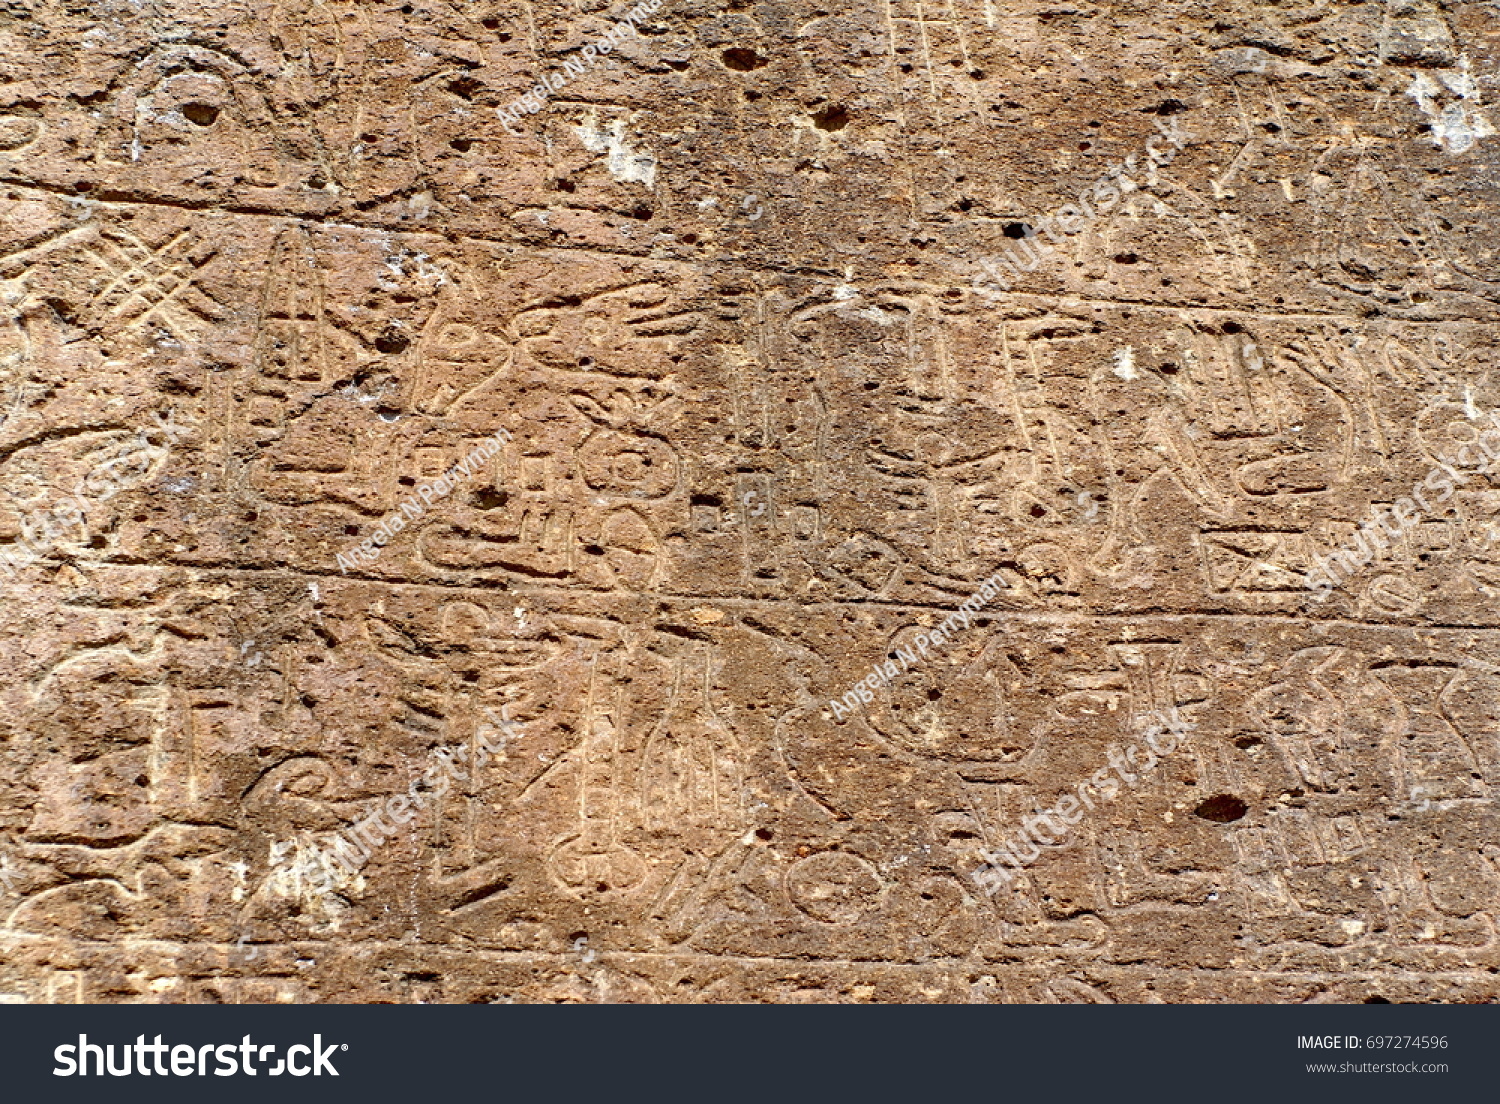 Hieroglyphs from the 8th century inscribed on a flat stone in Nevsehir province, Turkey #697274596